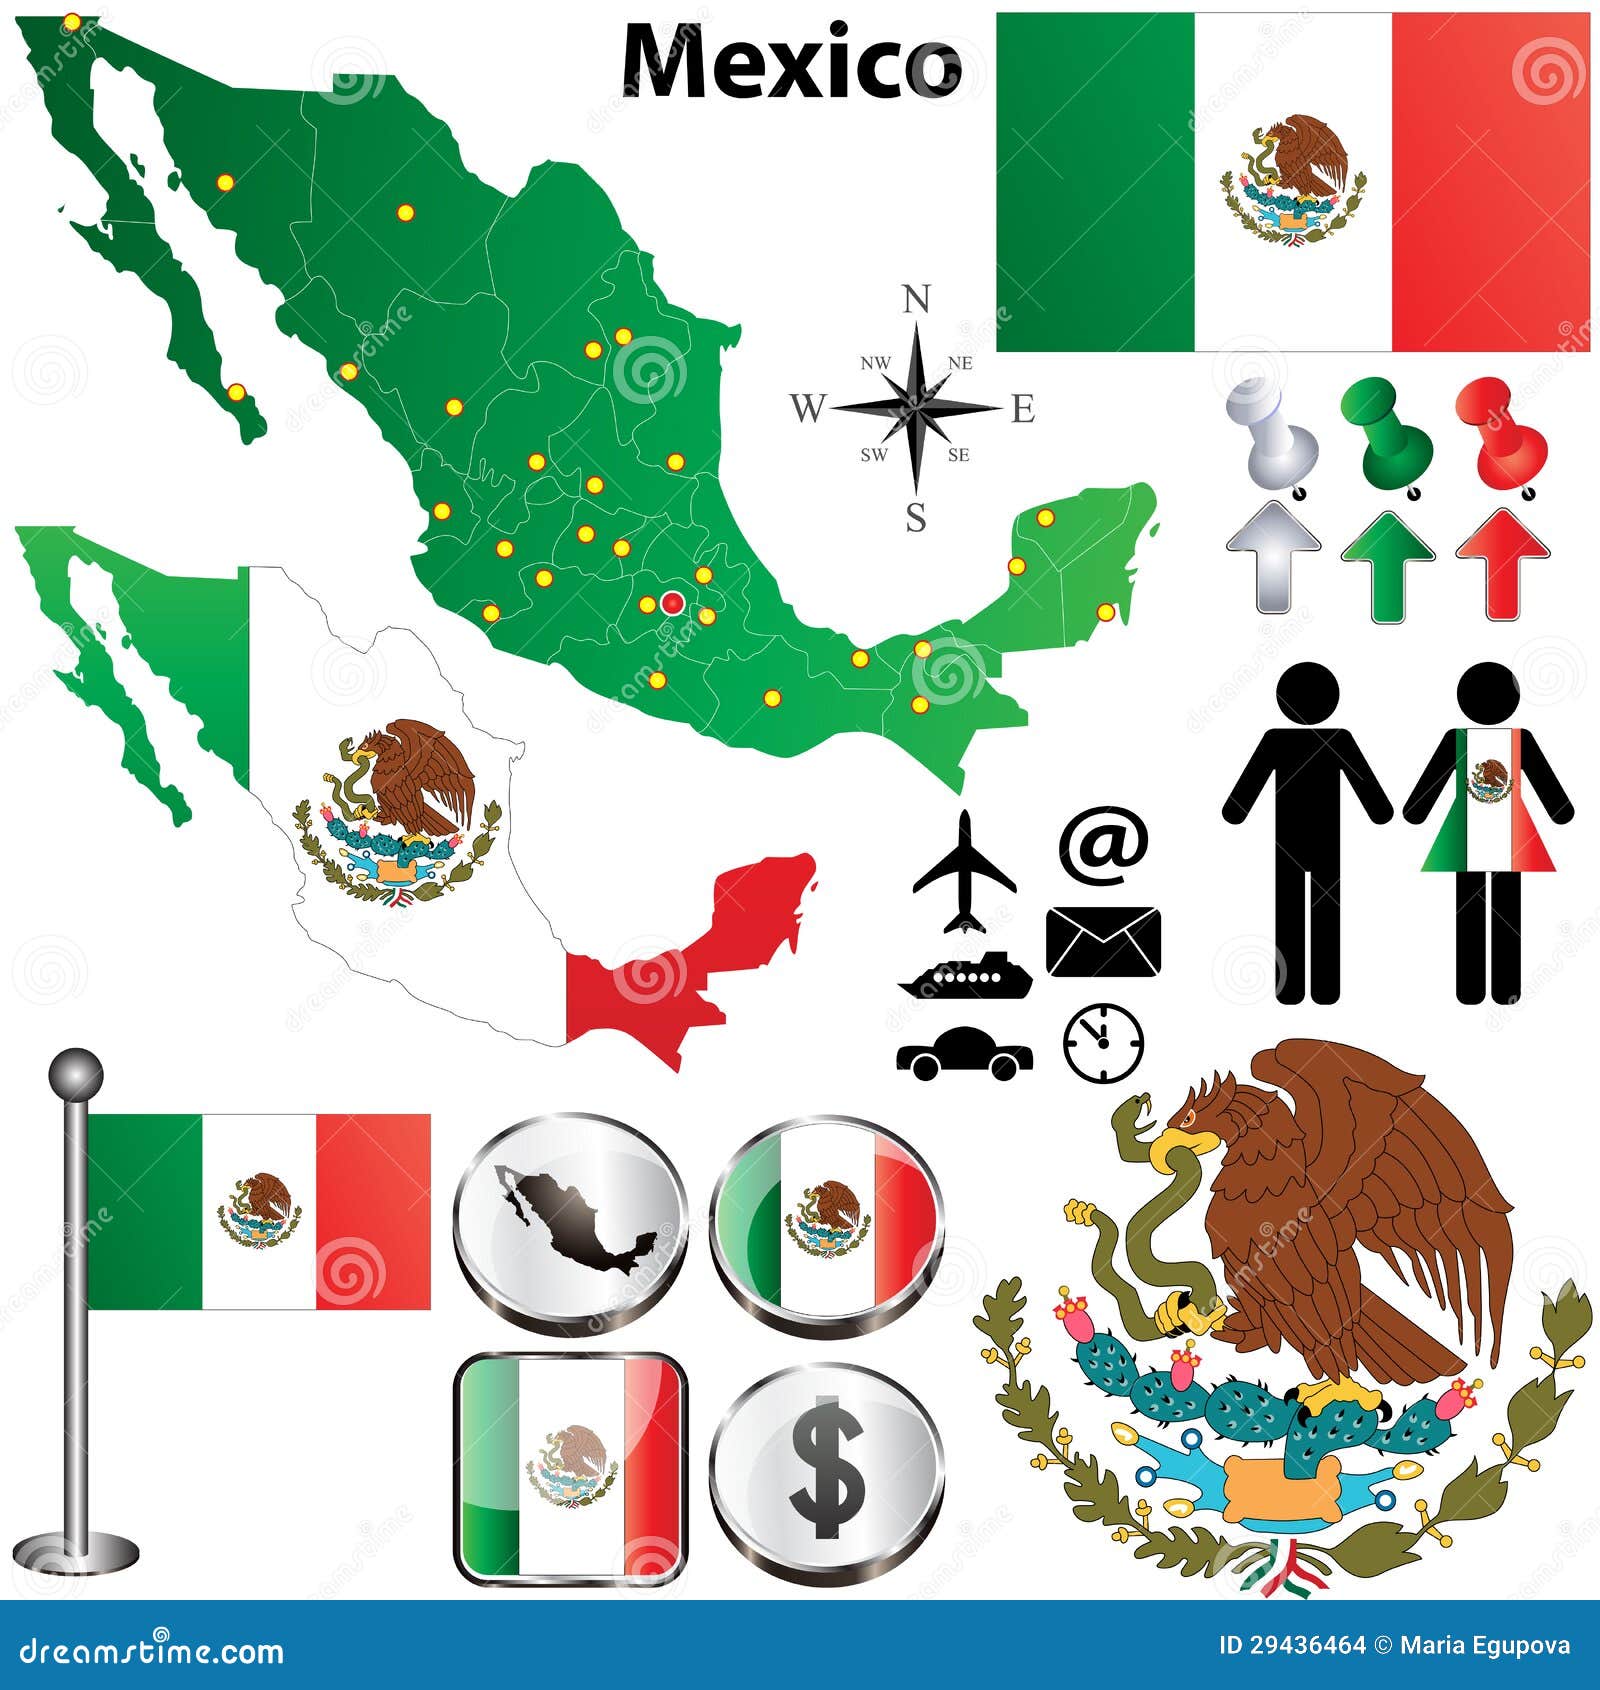 clipart map of mexico - photo #44